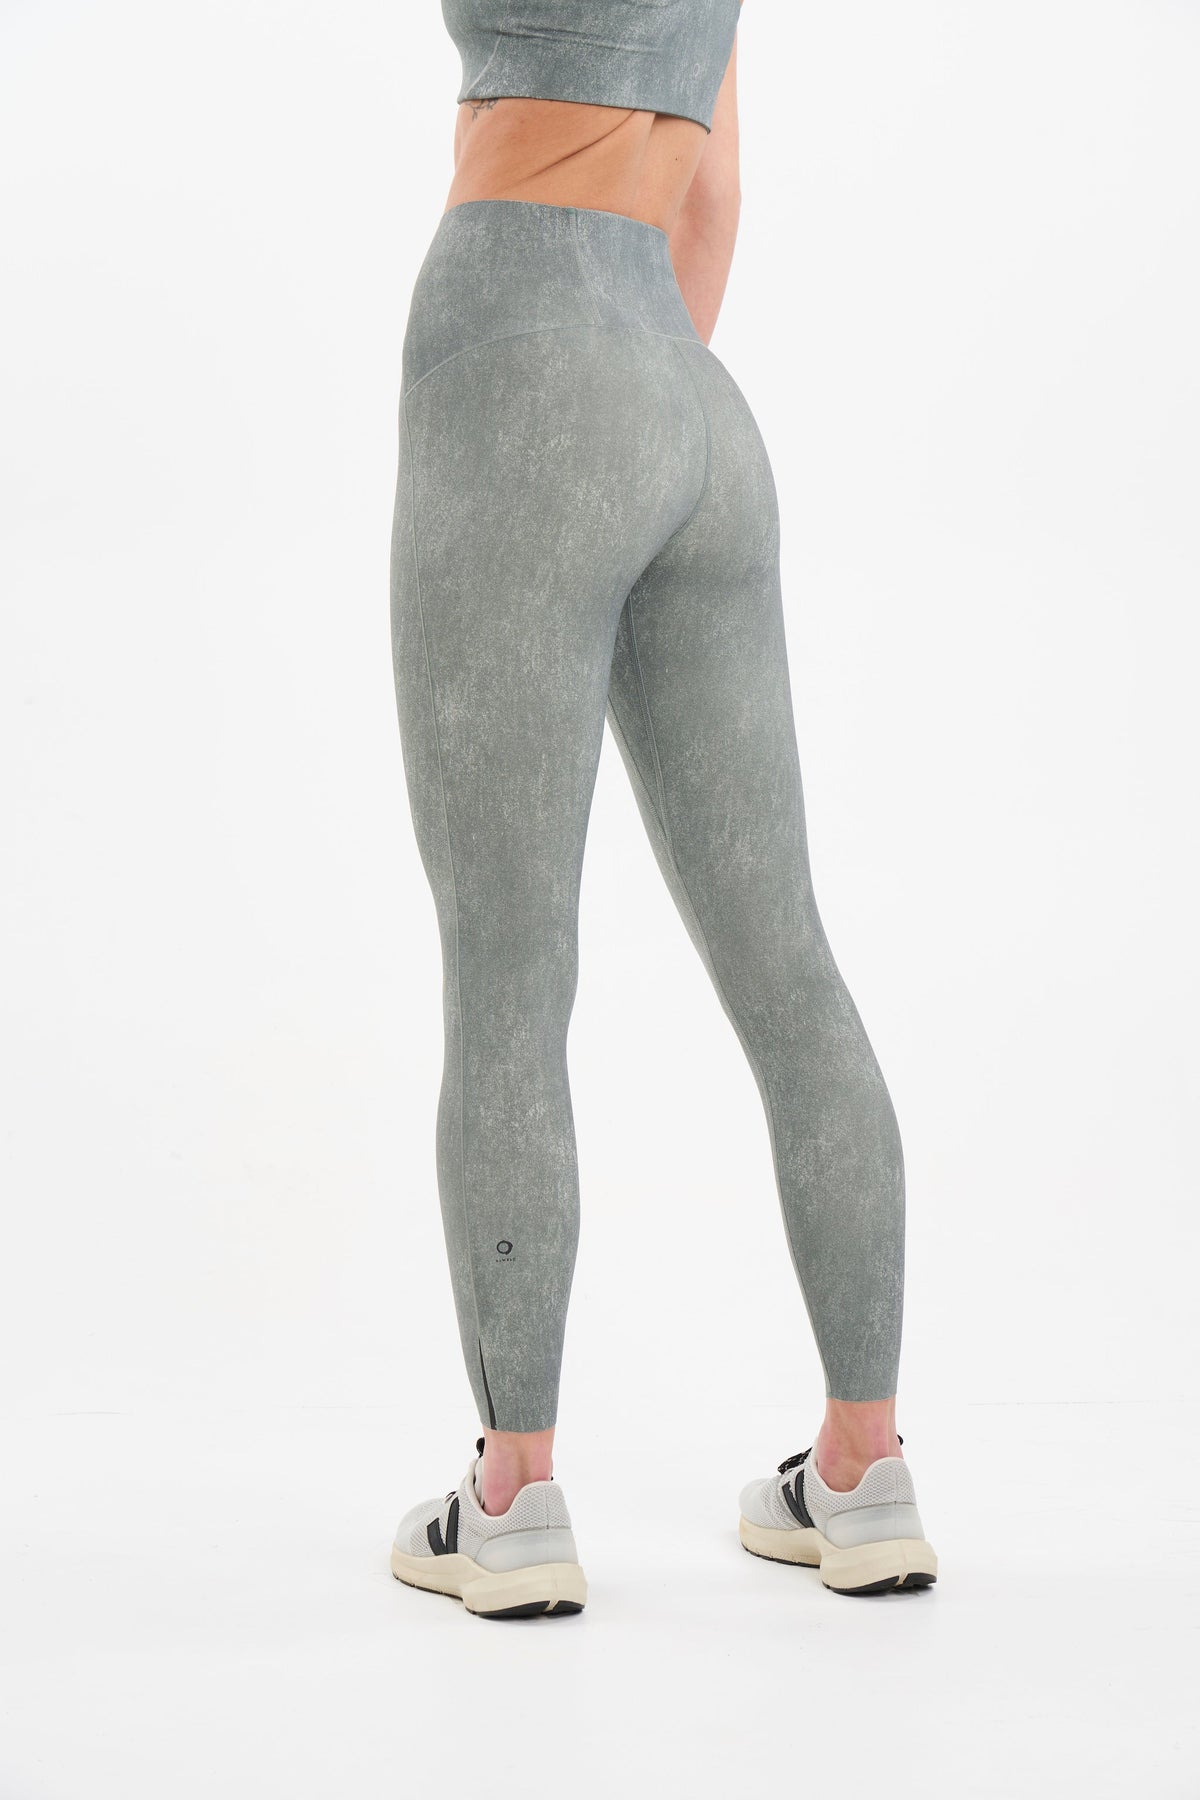 Back view of eco friendly high waisted compression tights for workout